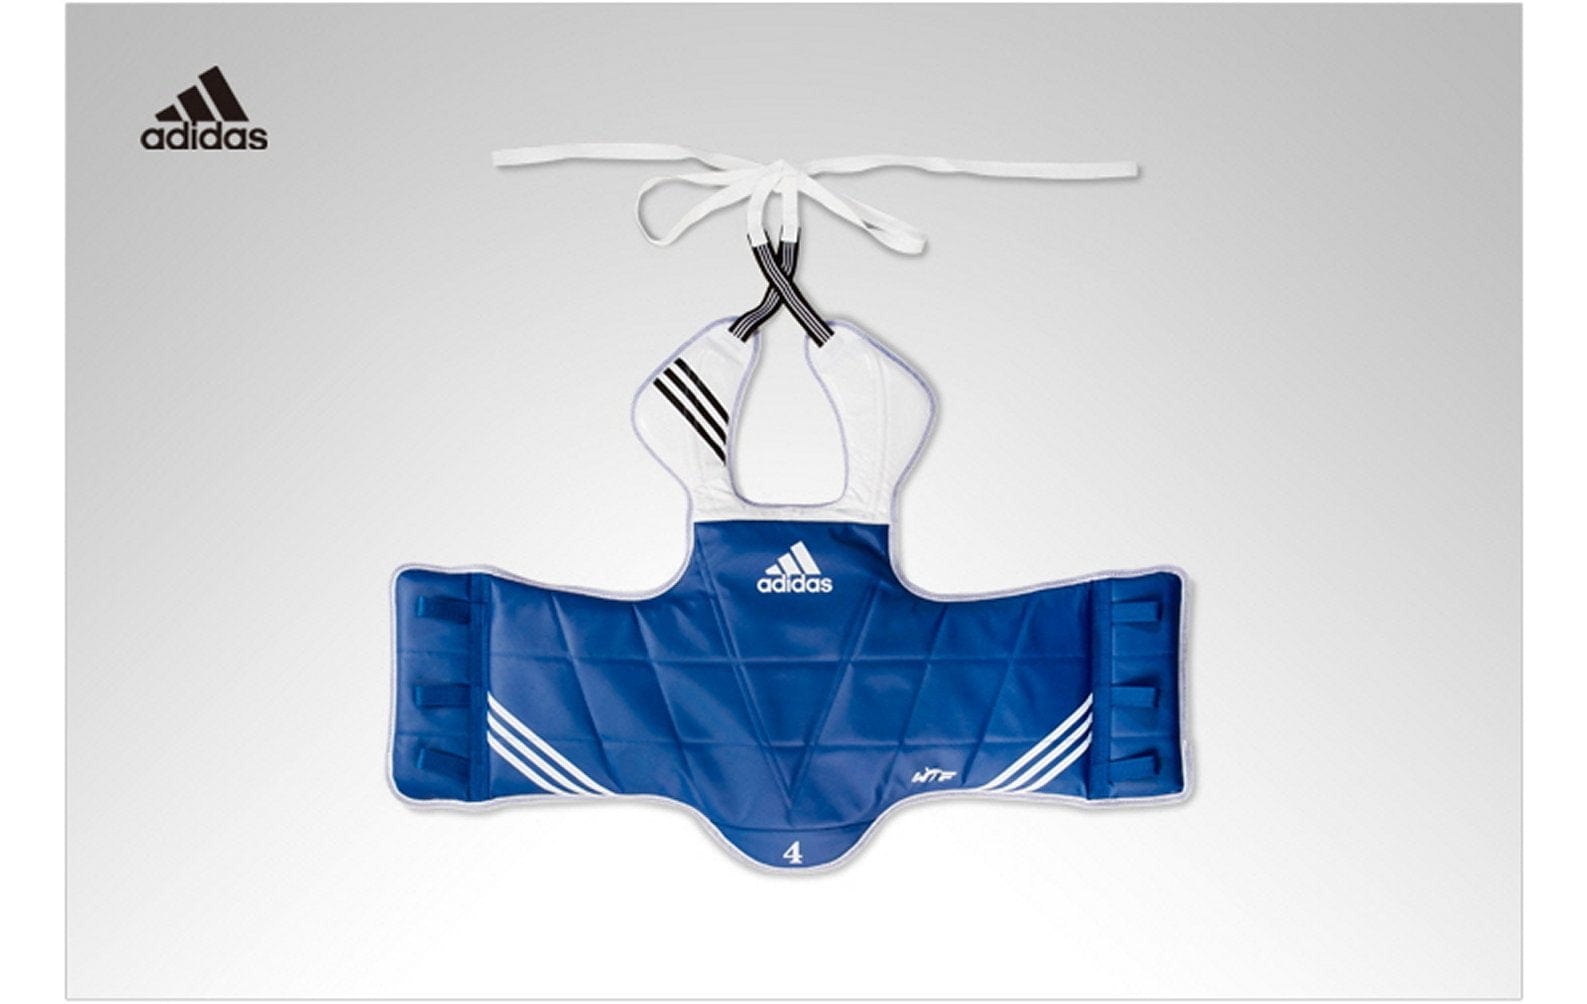 Adidas sporting goods ADIDAS NEW BODY PROTECTOR WTF approved